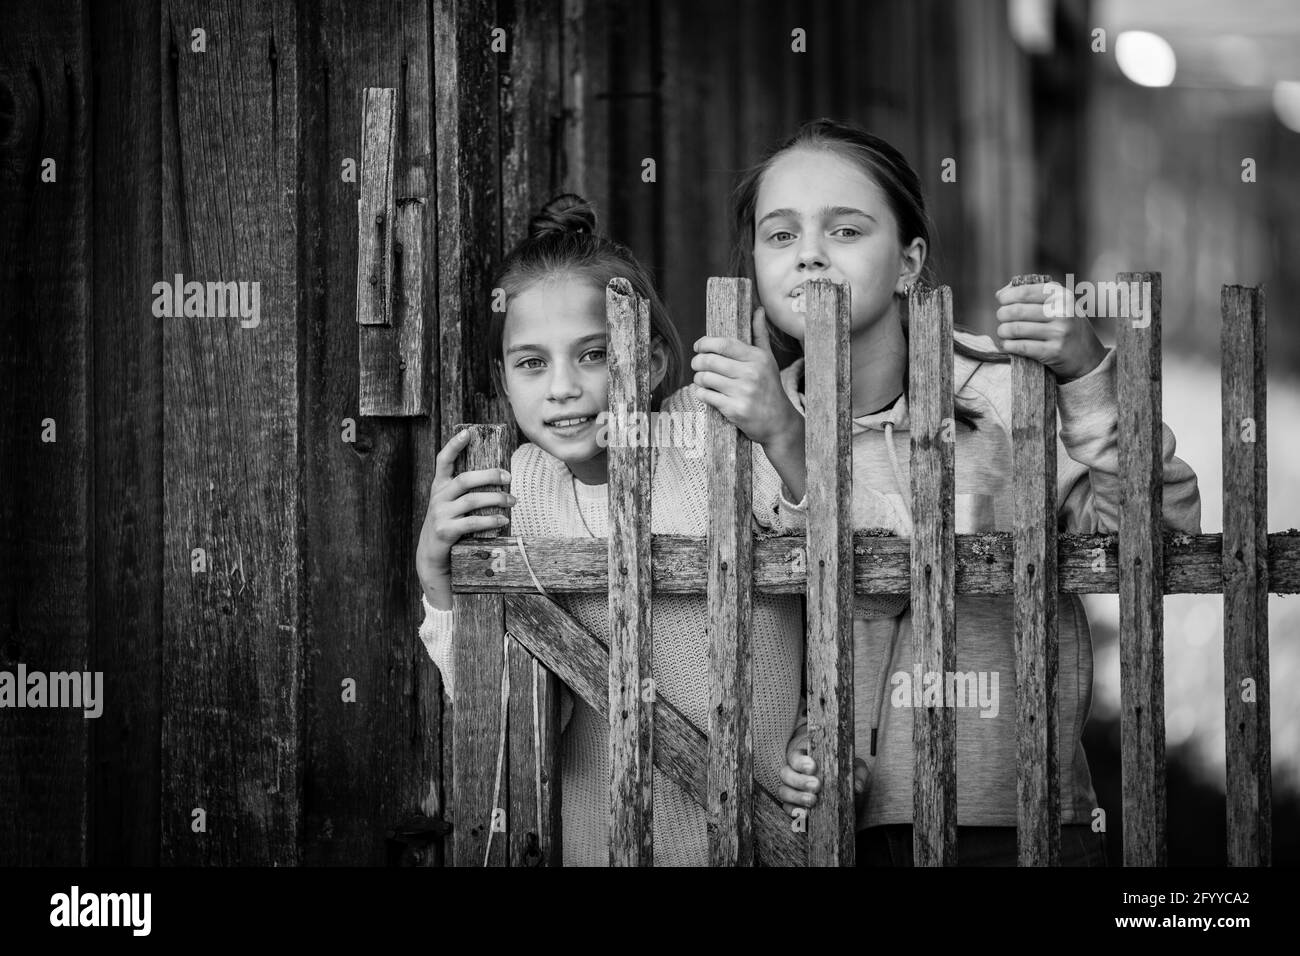 Two girls sisters or girlfriends in the village. Black and white photo. Stock Photo